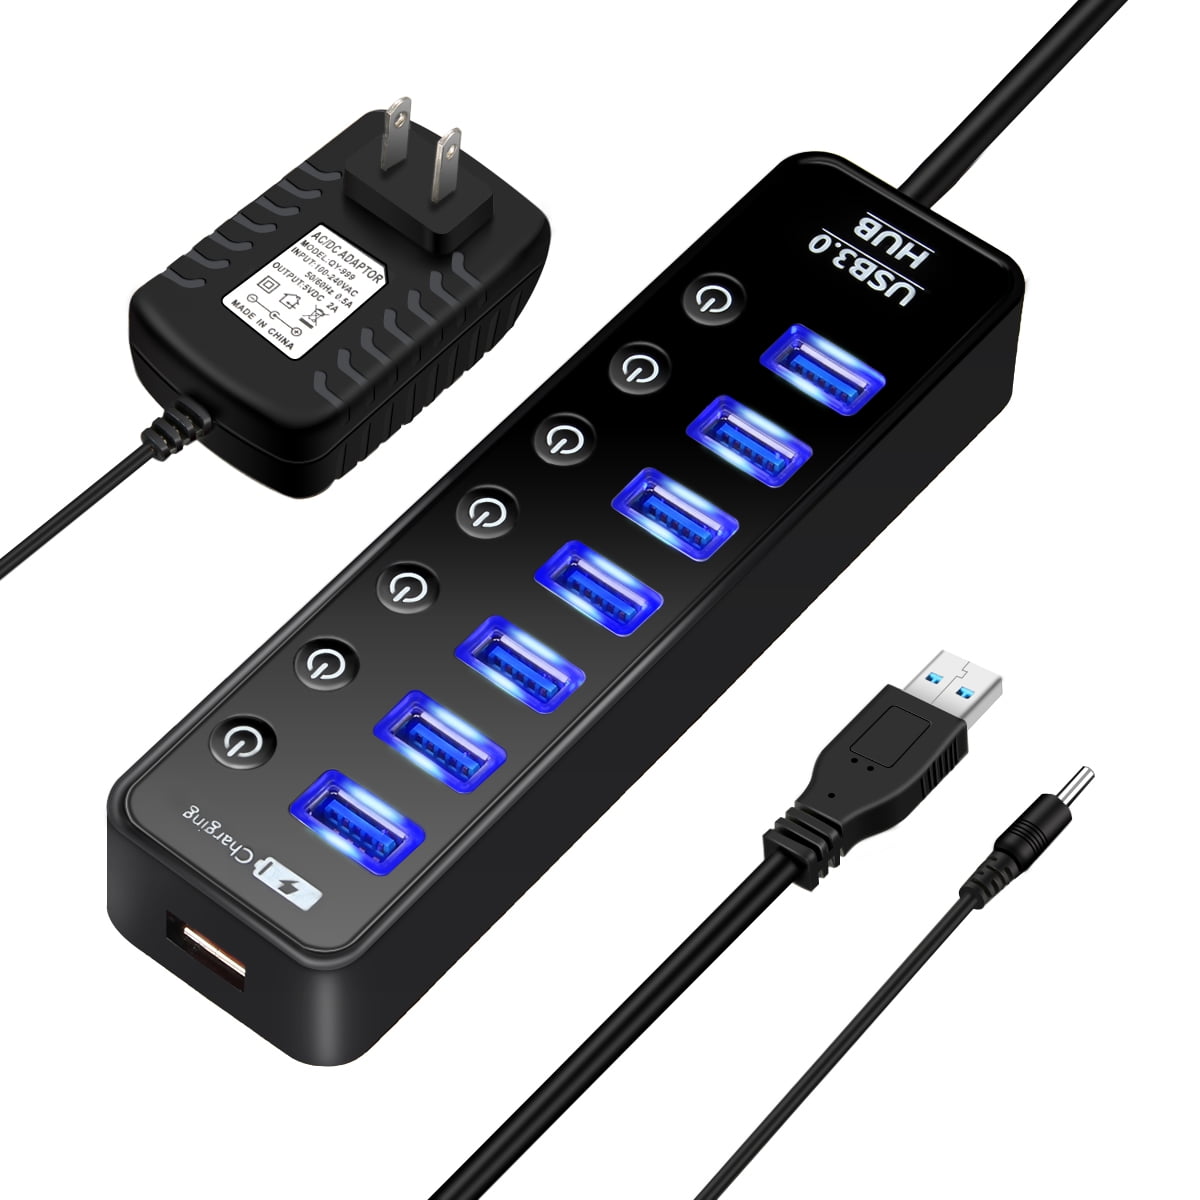 Powered USB Hub 3.0, 8/10 Port 5Gbps USB Data Hub, 1 Smart Charging Port, USB Splitter with Individual On/Off Switch 5V/4A Adapter, Usb Hub for Laptop, PC, Computer -